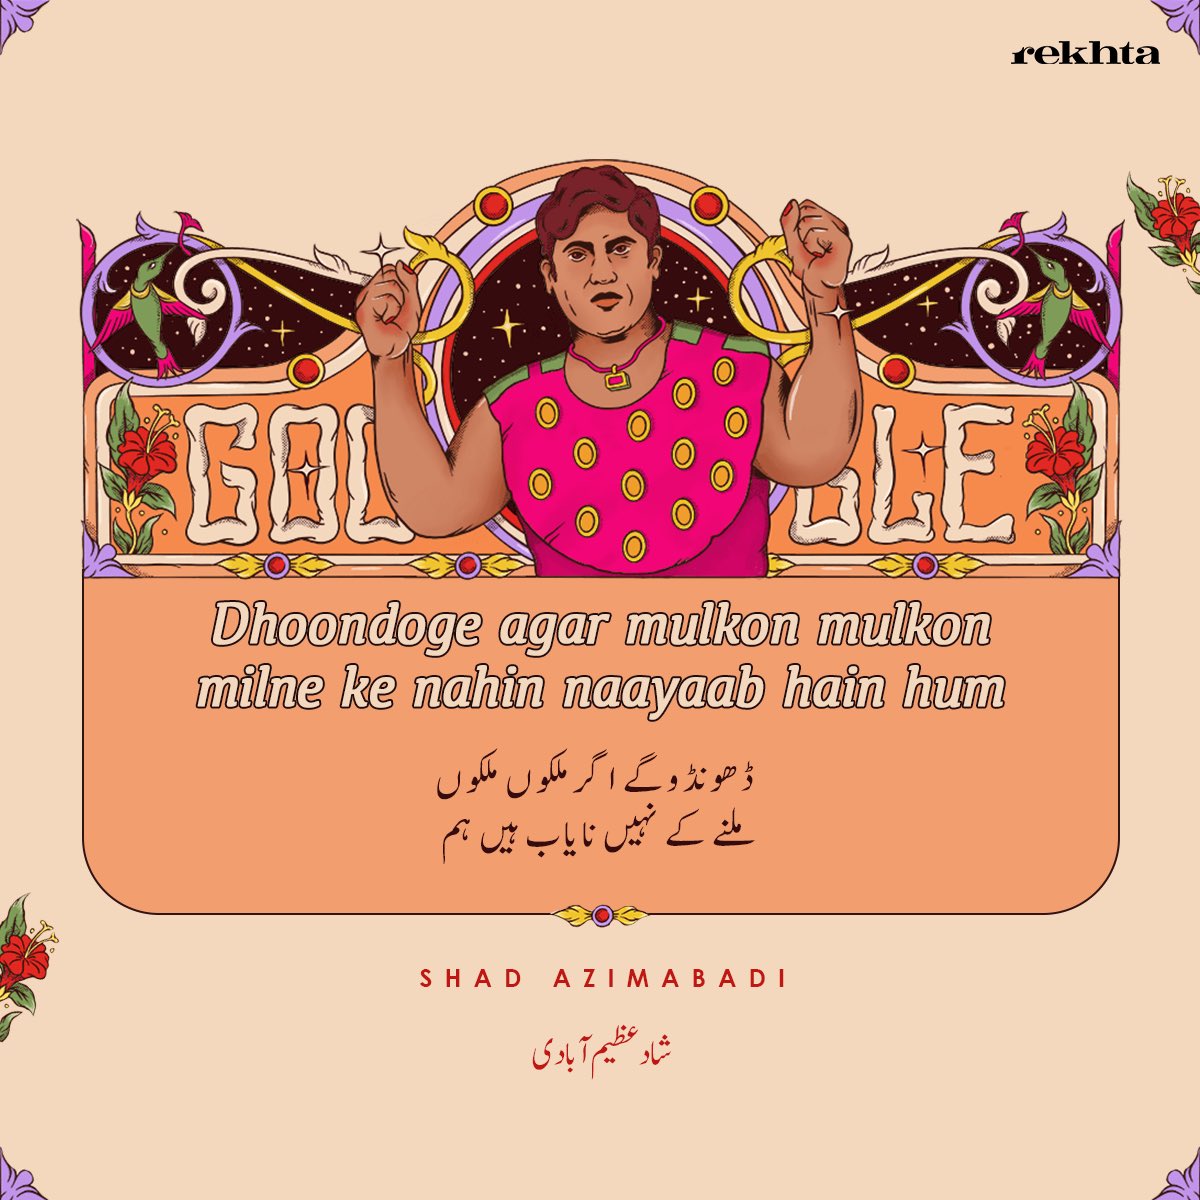 Remembering Indian wrestler Hamida Banu, who is widely considered to be India’s first professional woman wrestler.

Credits: @GoogleIndia Doodle

#hamidabanu #google #doodle #googledoodle #rekhta